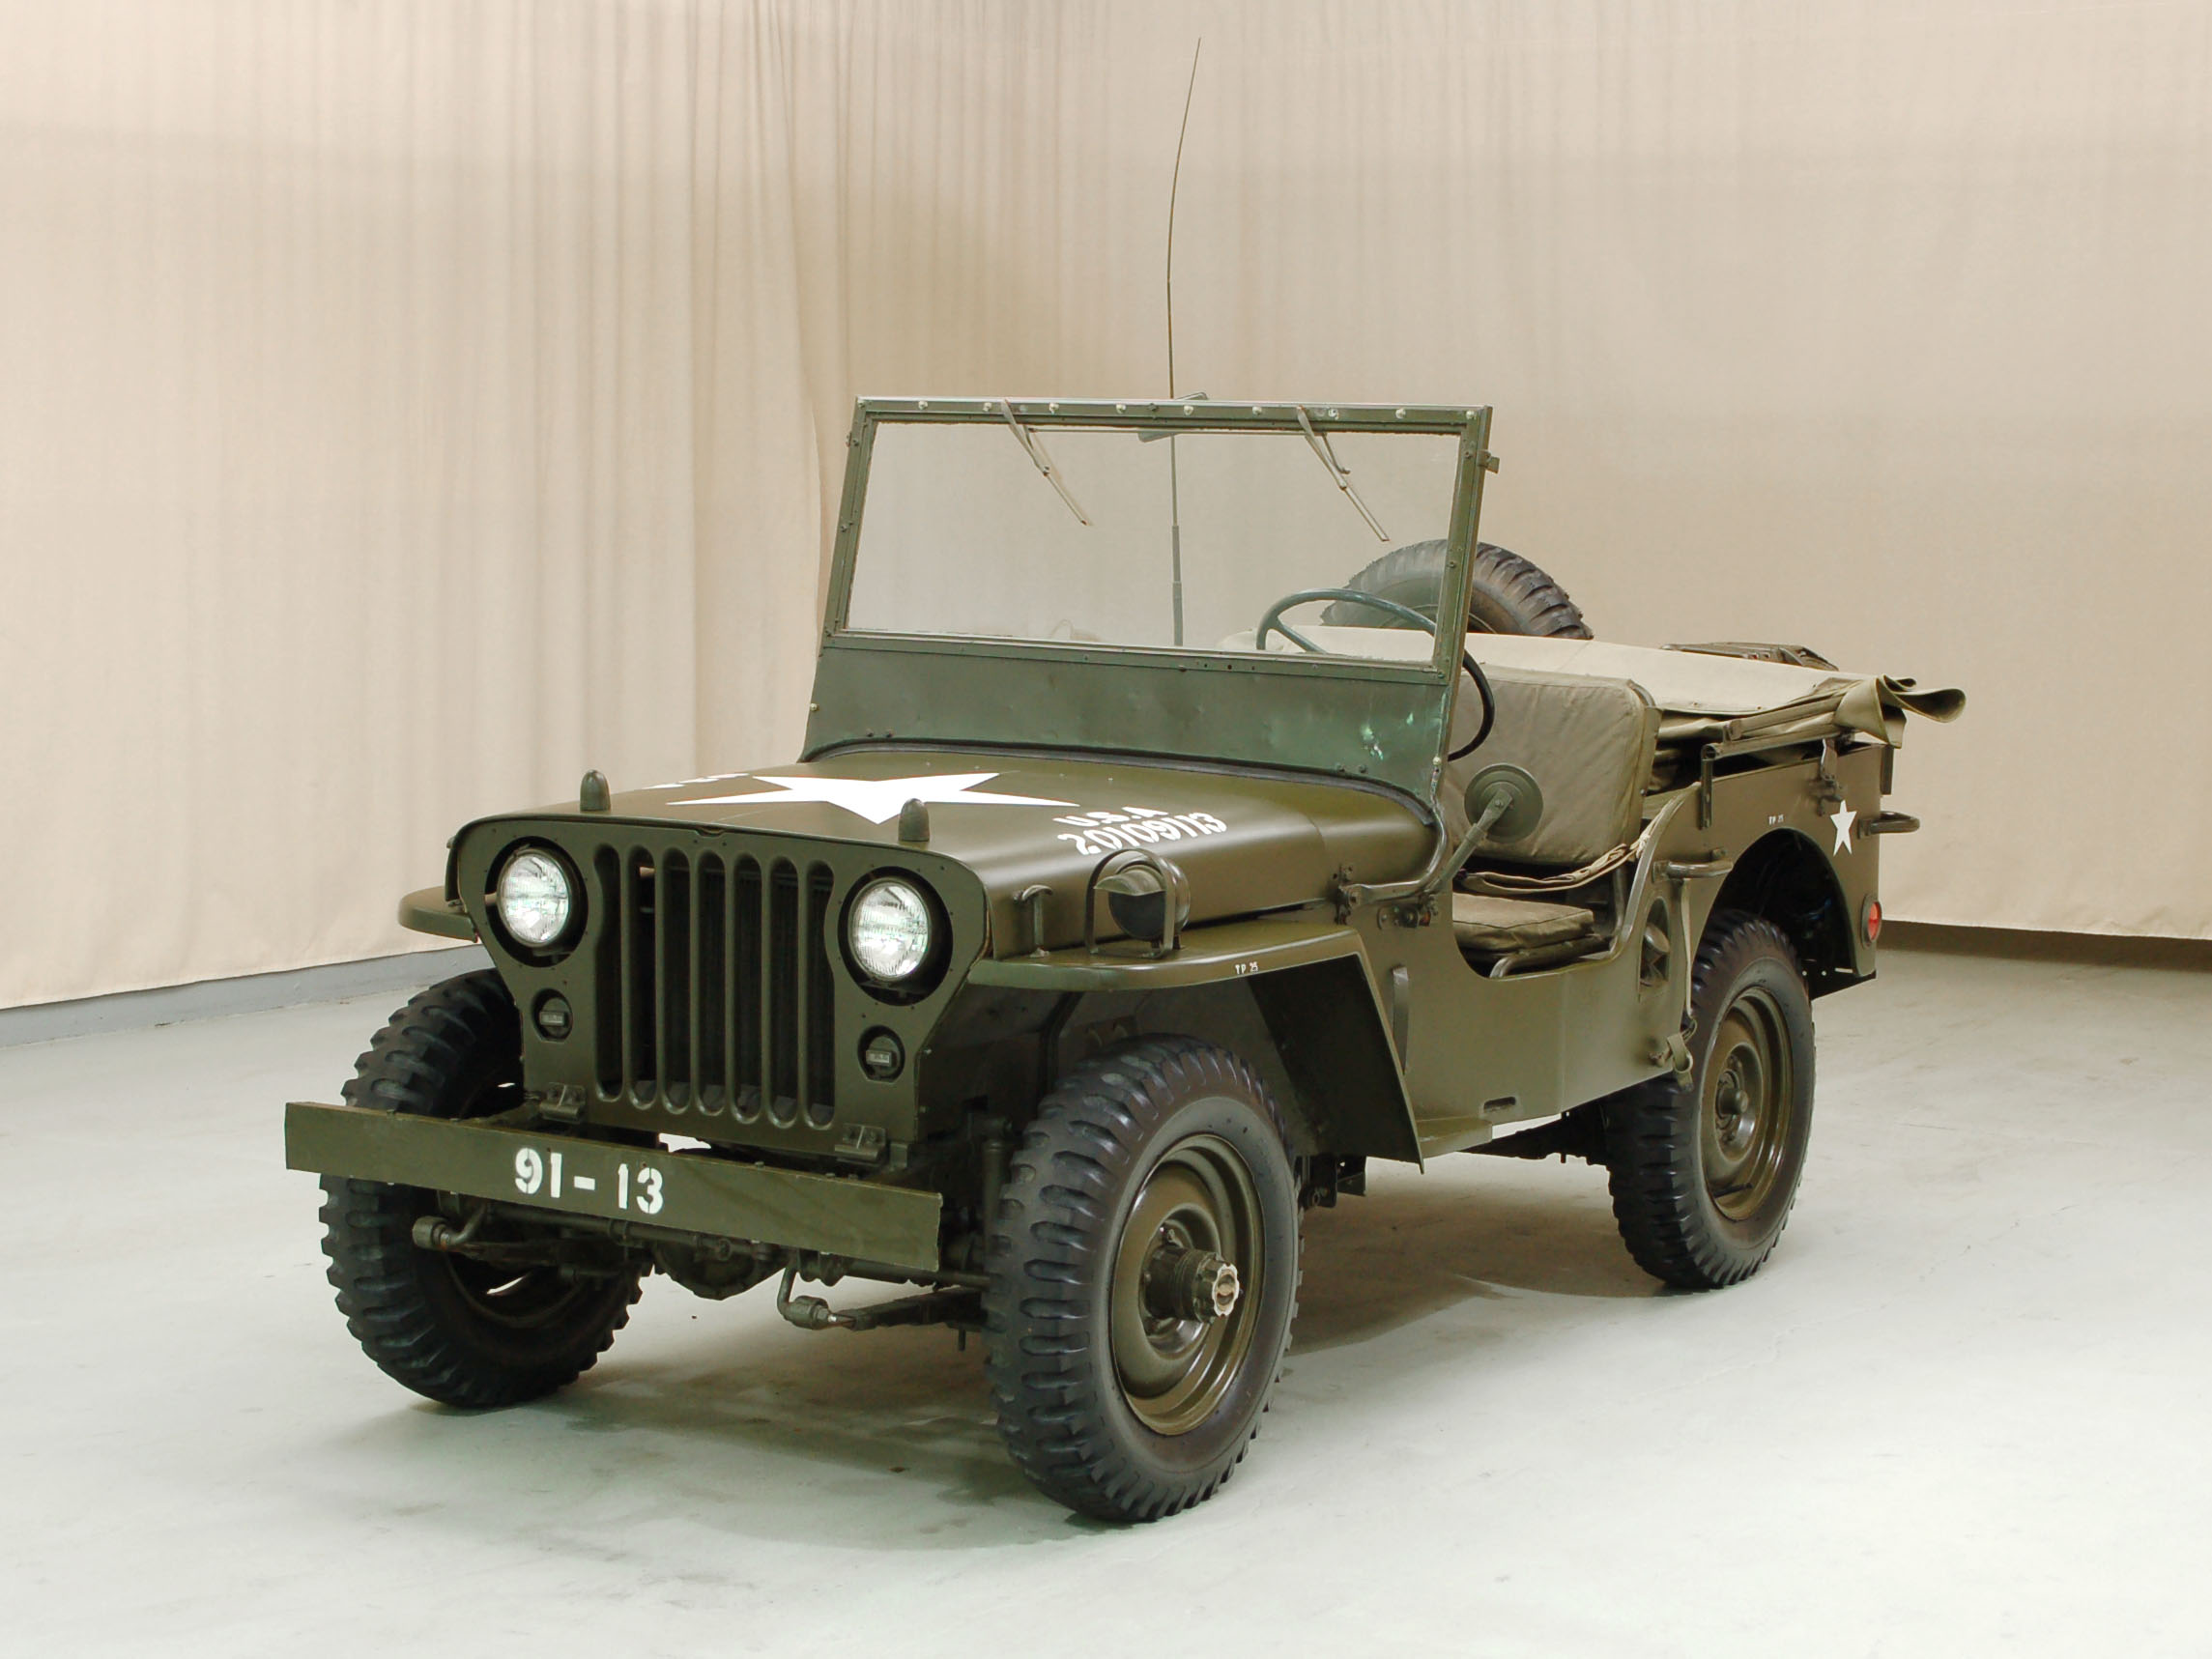 1944 willys-overland mb (jeep) 1/4 ton